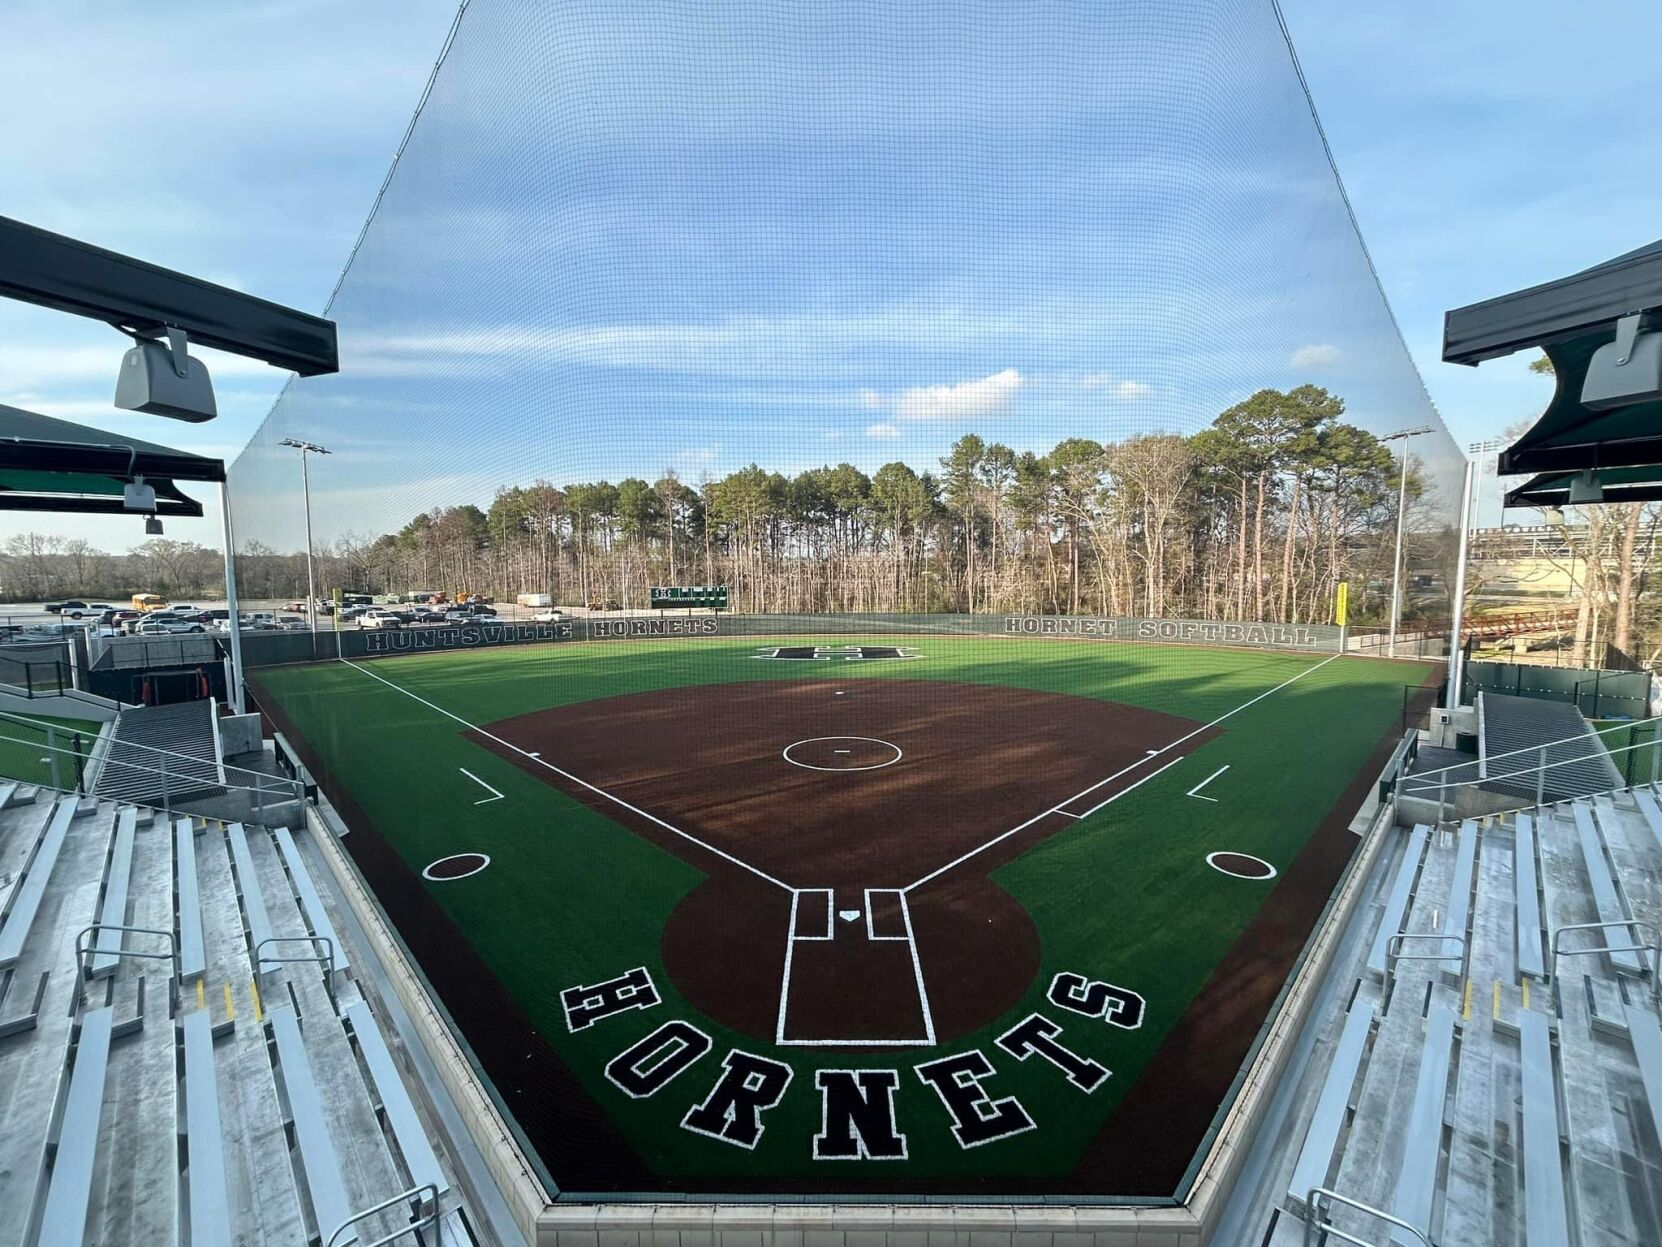 Huntsville Softball: Lady Hornets Debut New Stadium with 500th Strikeout Leader